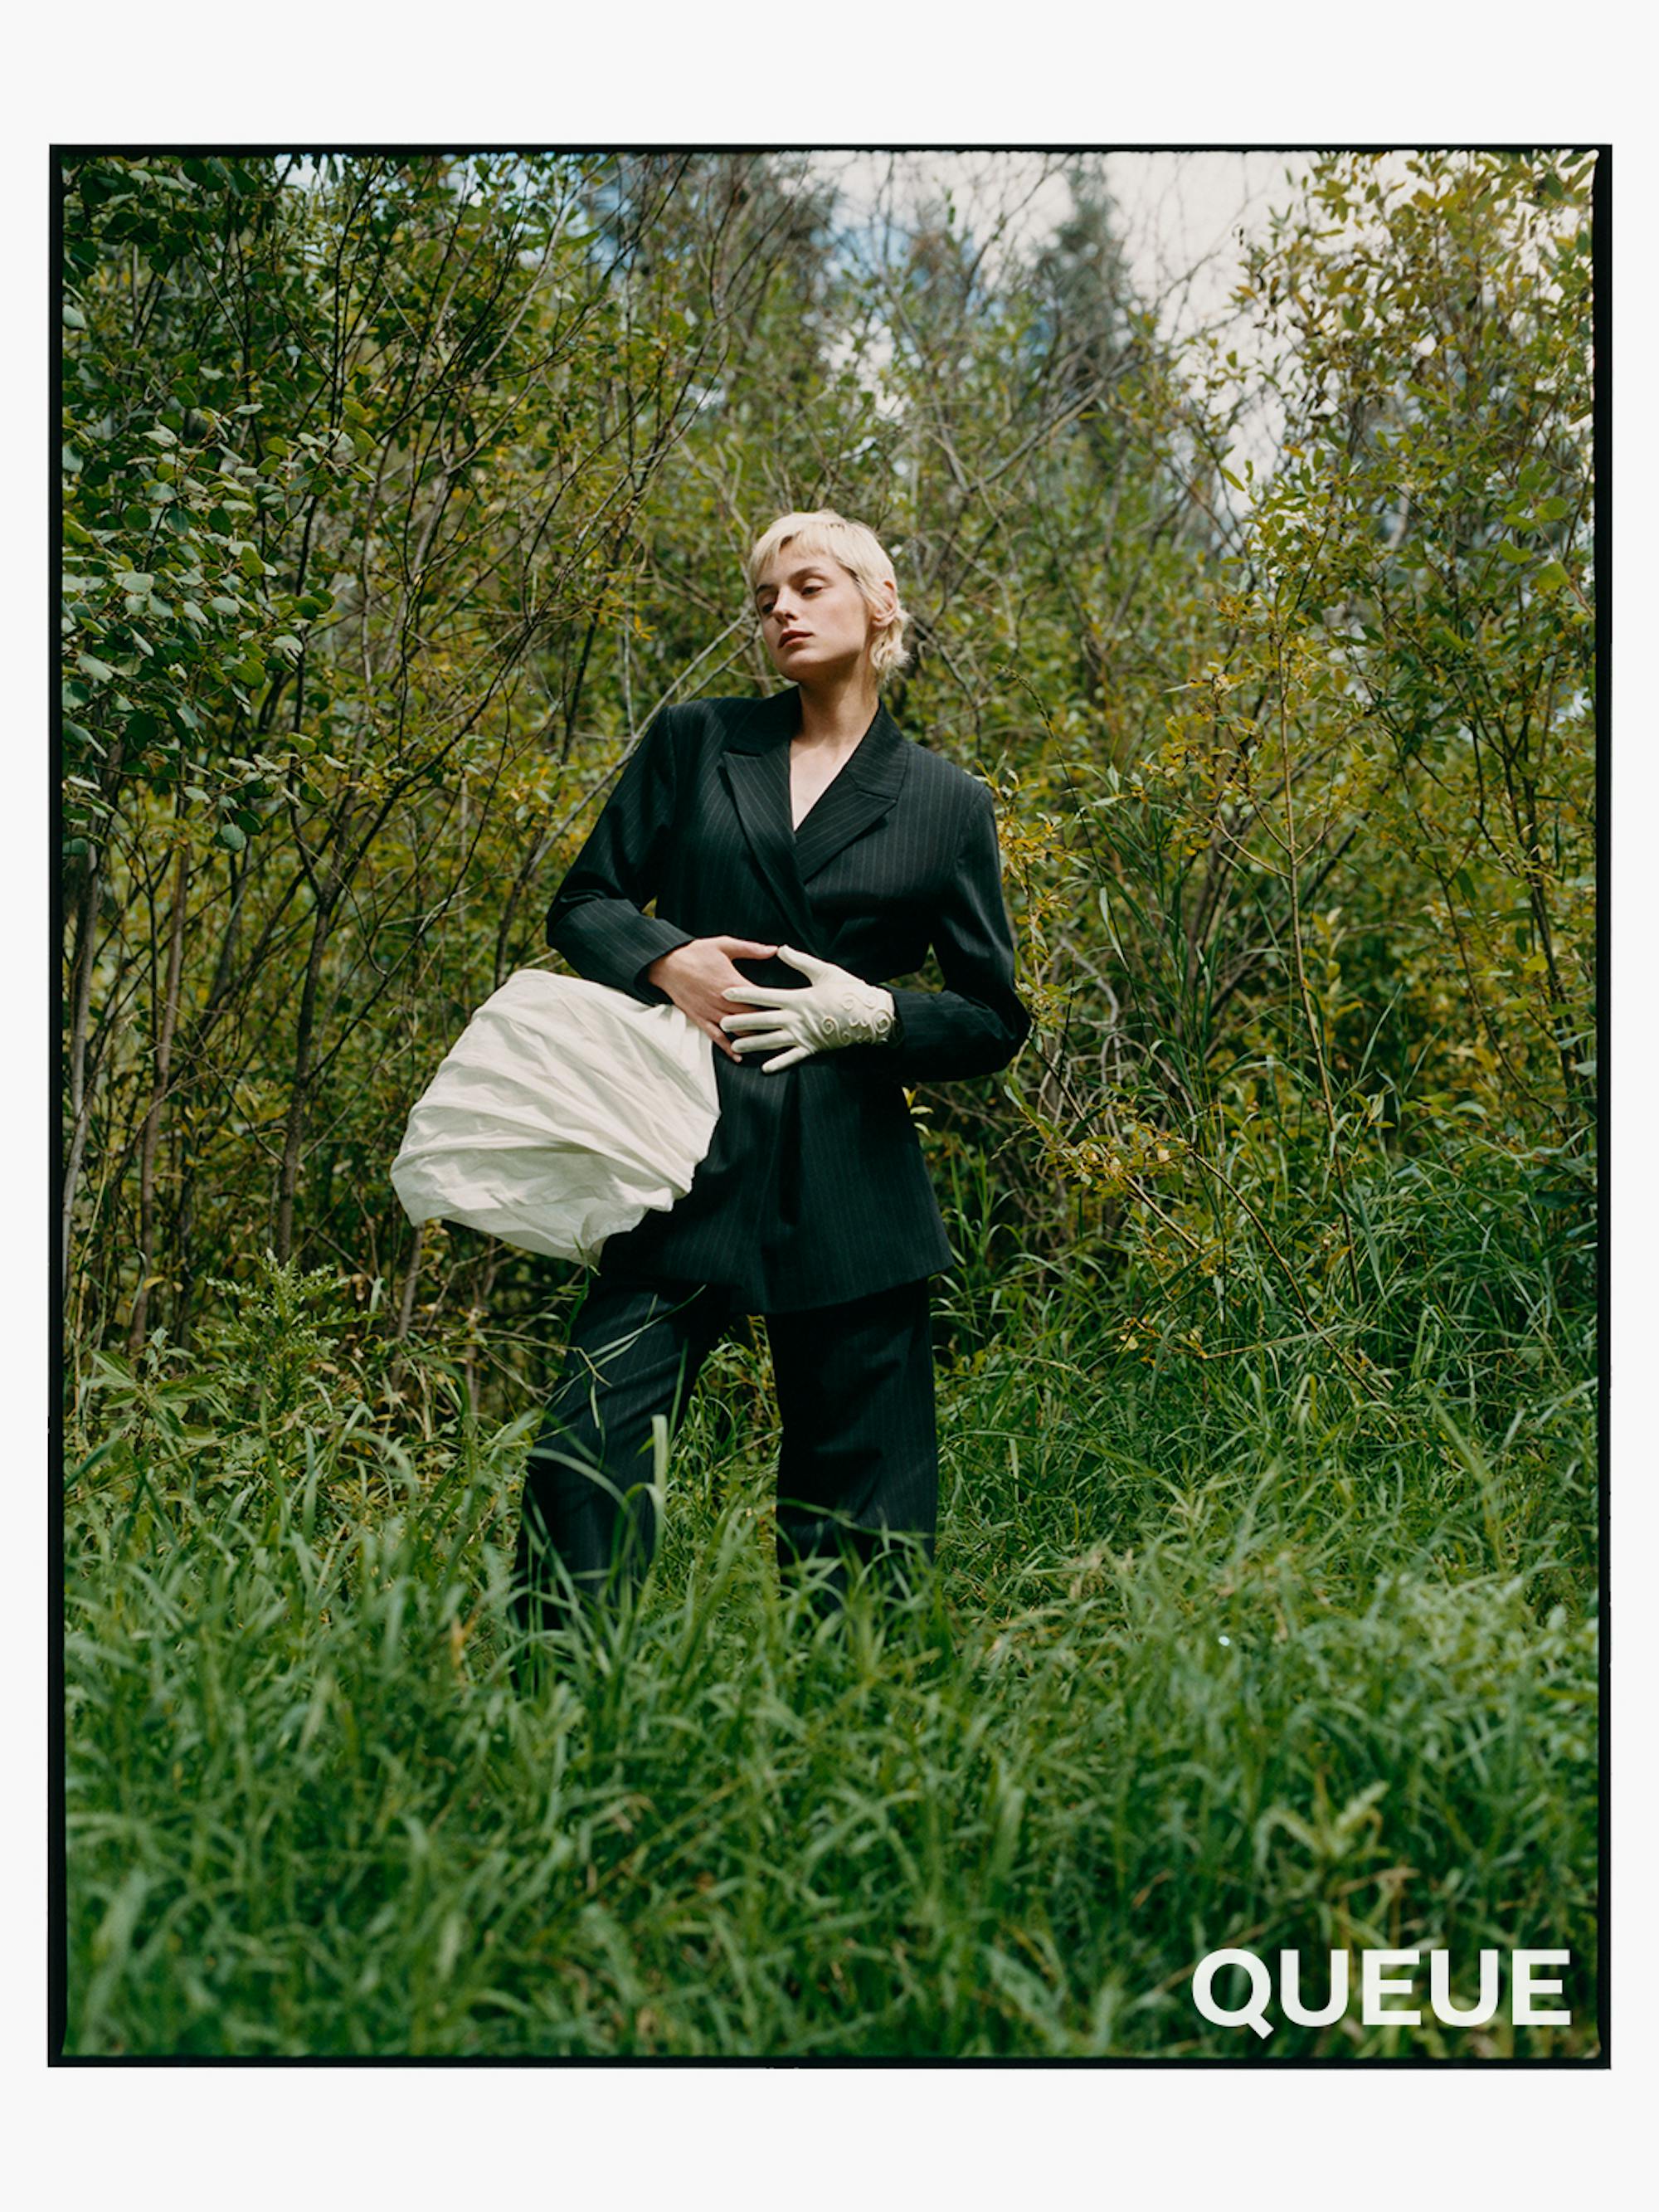 Emma Corrin wears a black ensemble with a white side piece, standing in a green field.